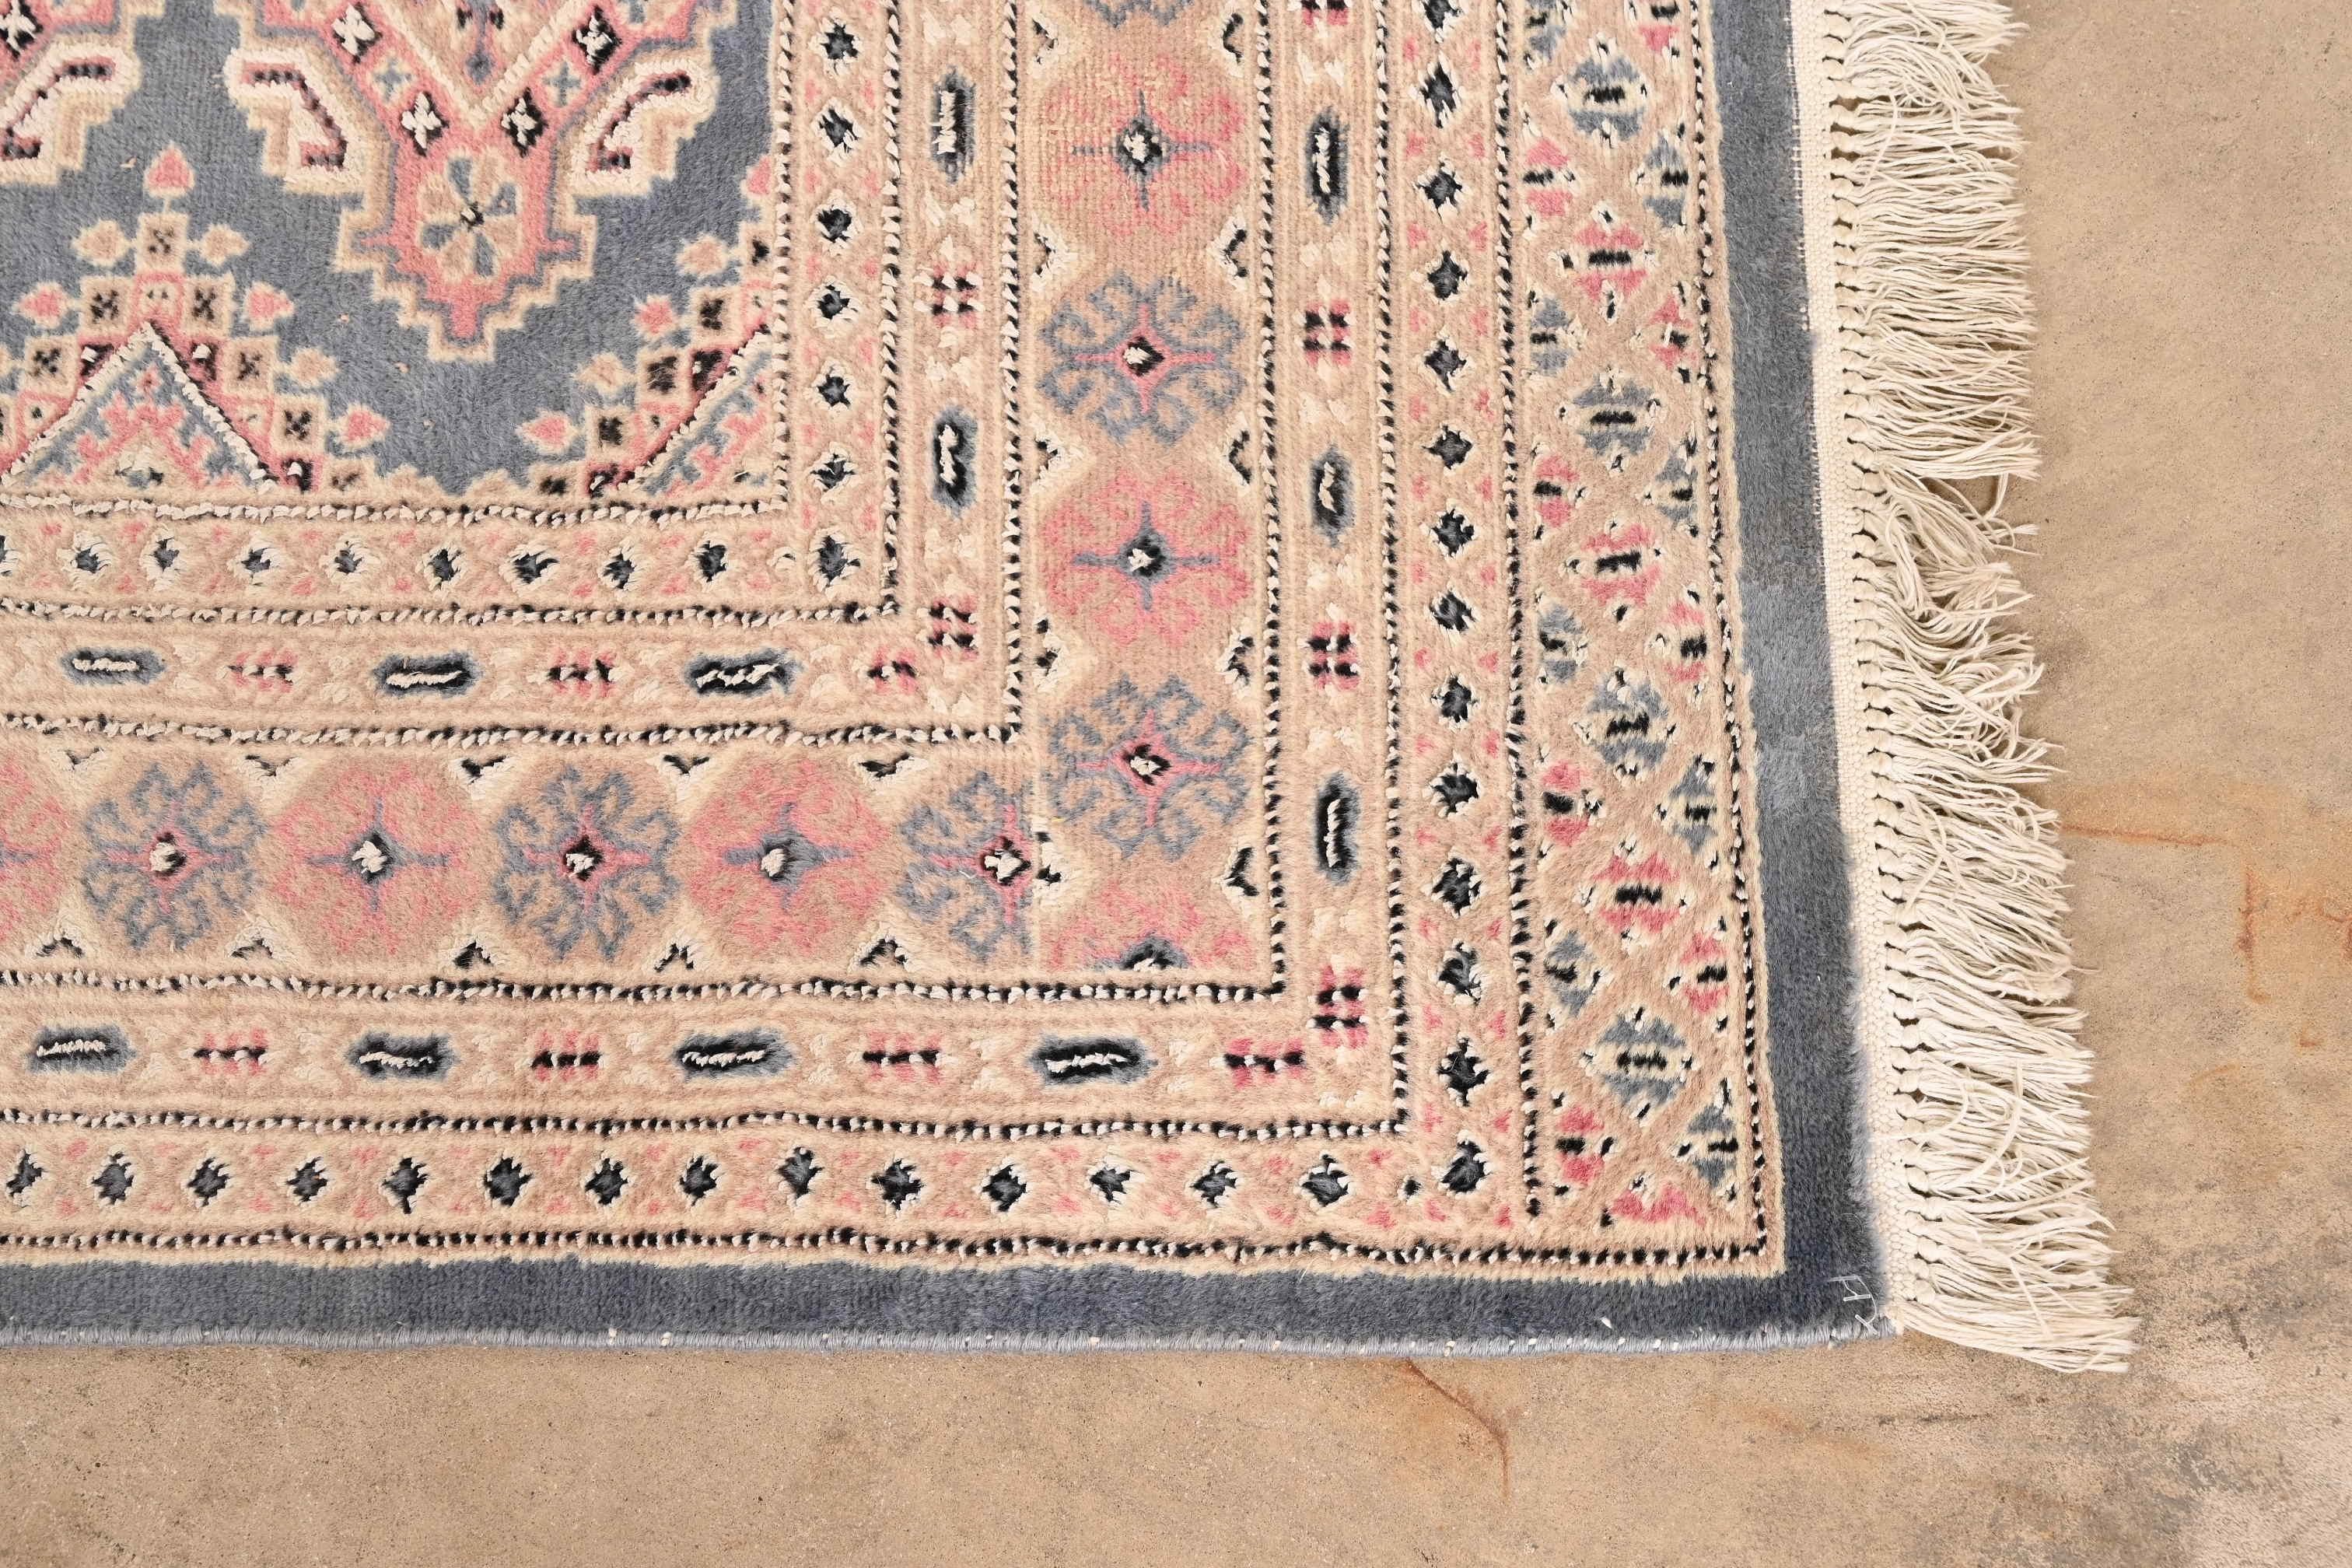 Vintage Hand-Woven Persian Bokhara Wool Rug in Light Blue, Pink, and Cream 4